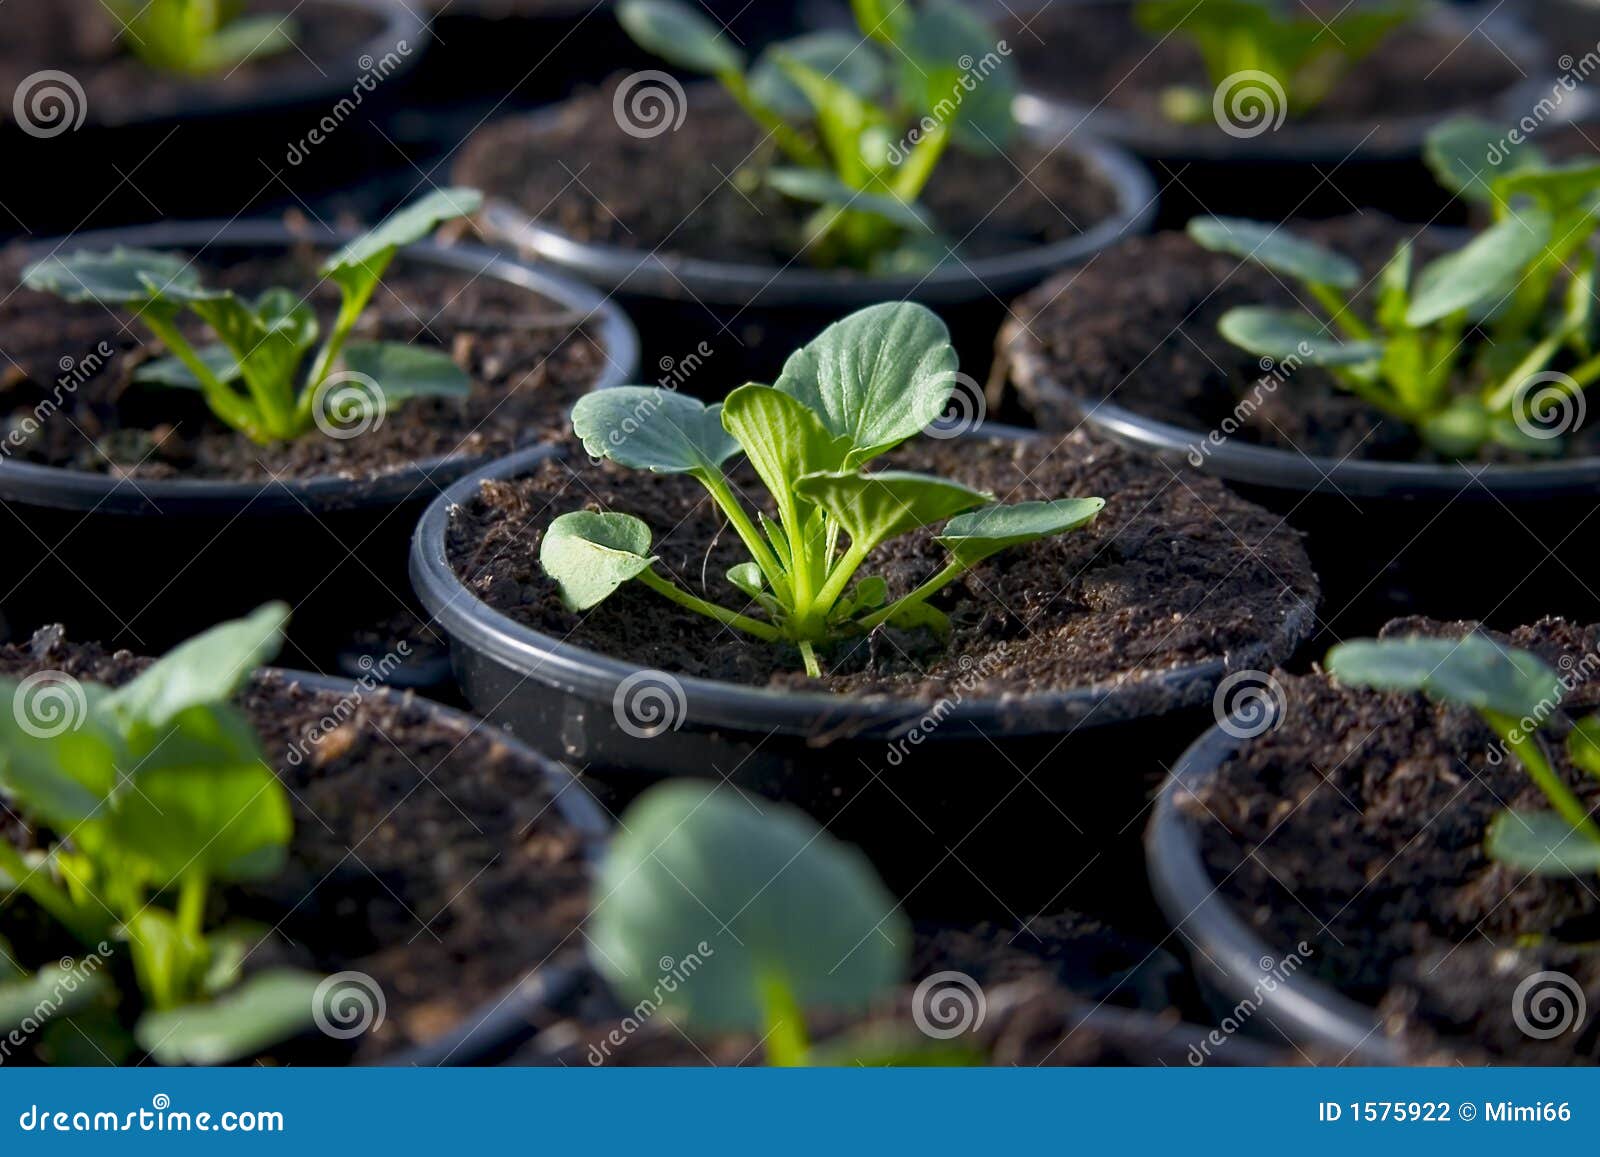 young flowers in a plant nursery 1